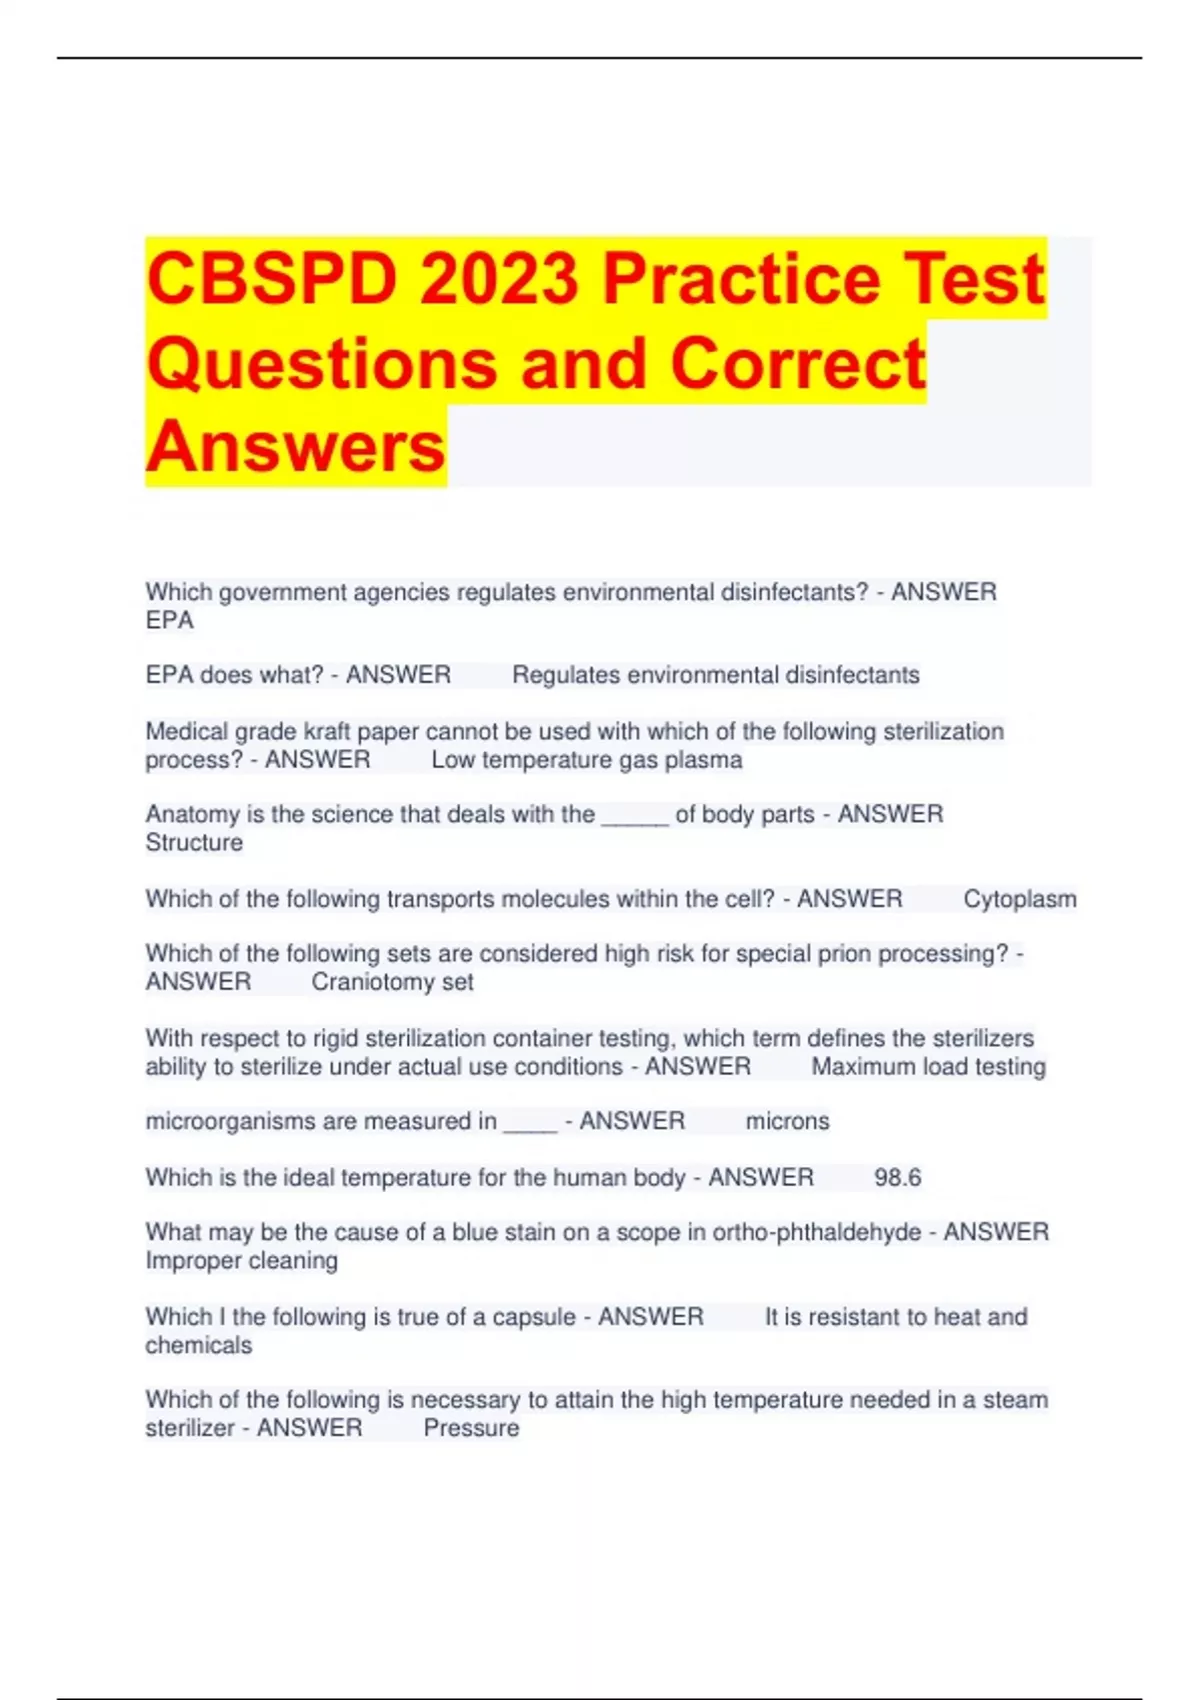 CBSPD 2023 Practice Test Questions and Correct Answers CBSPD Stuvia US